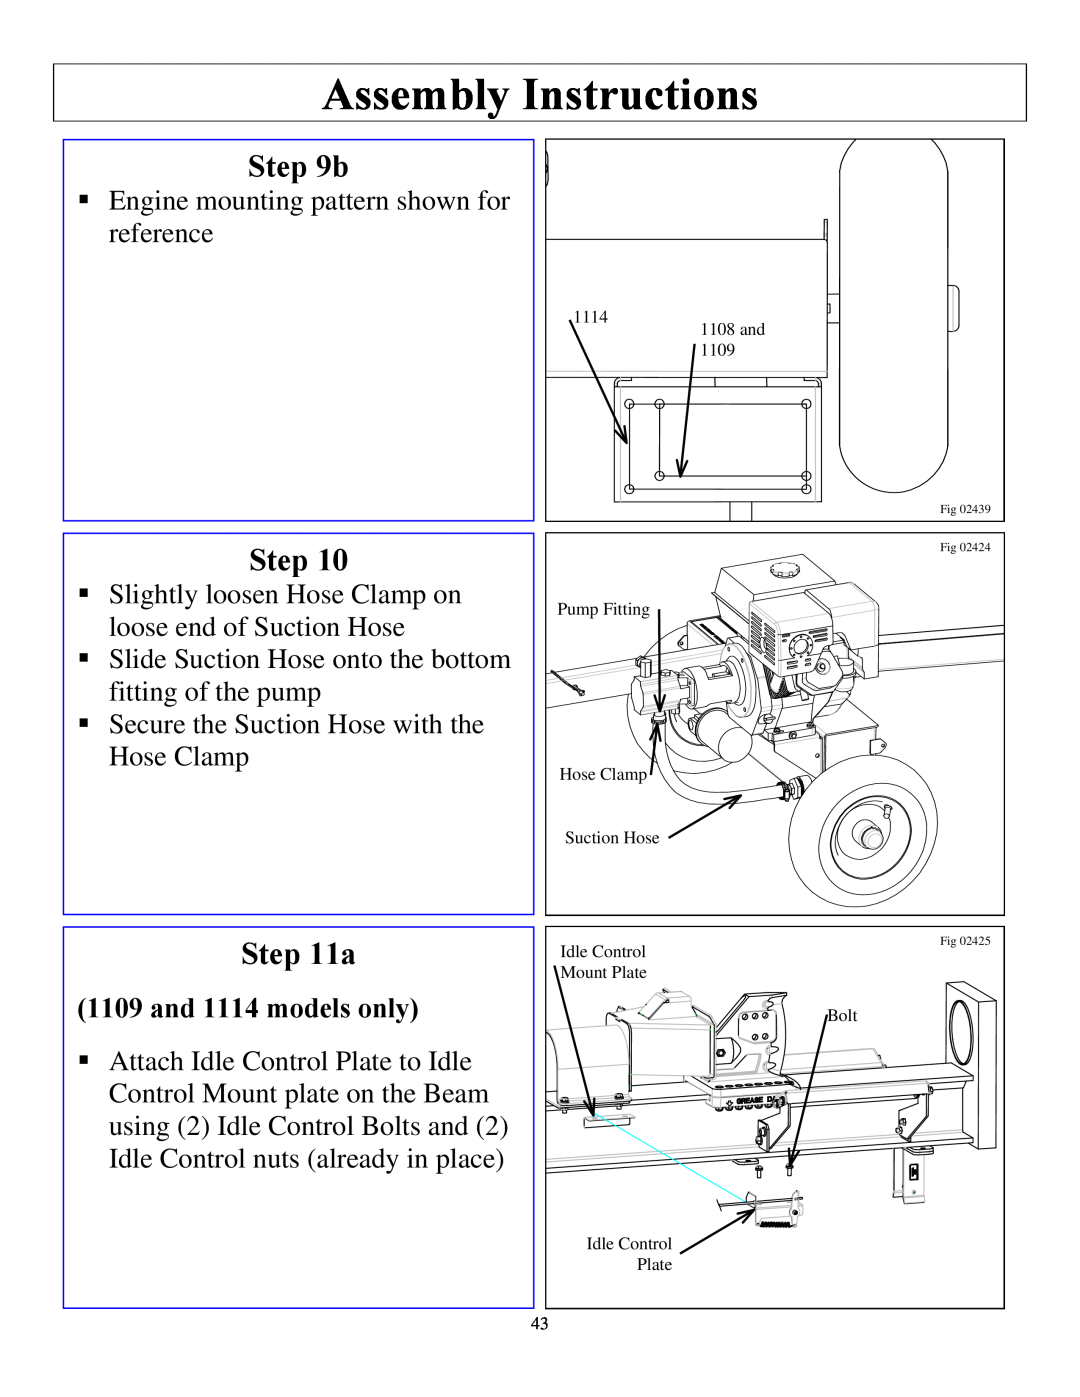 North Star M1108D owner manual Assembly Instructions, Step, and 1114 models only 